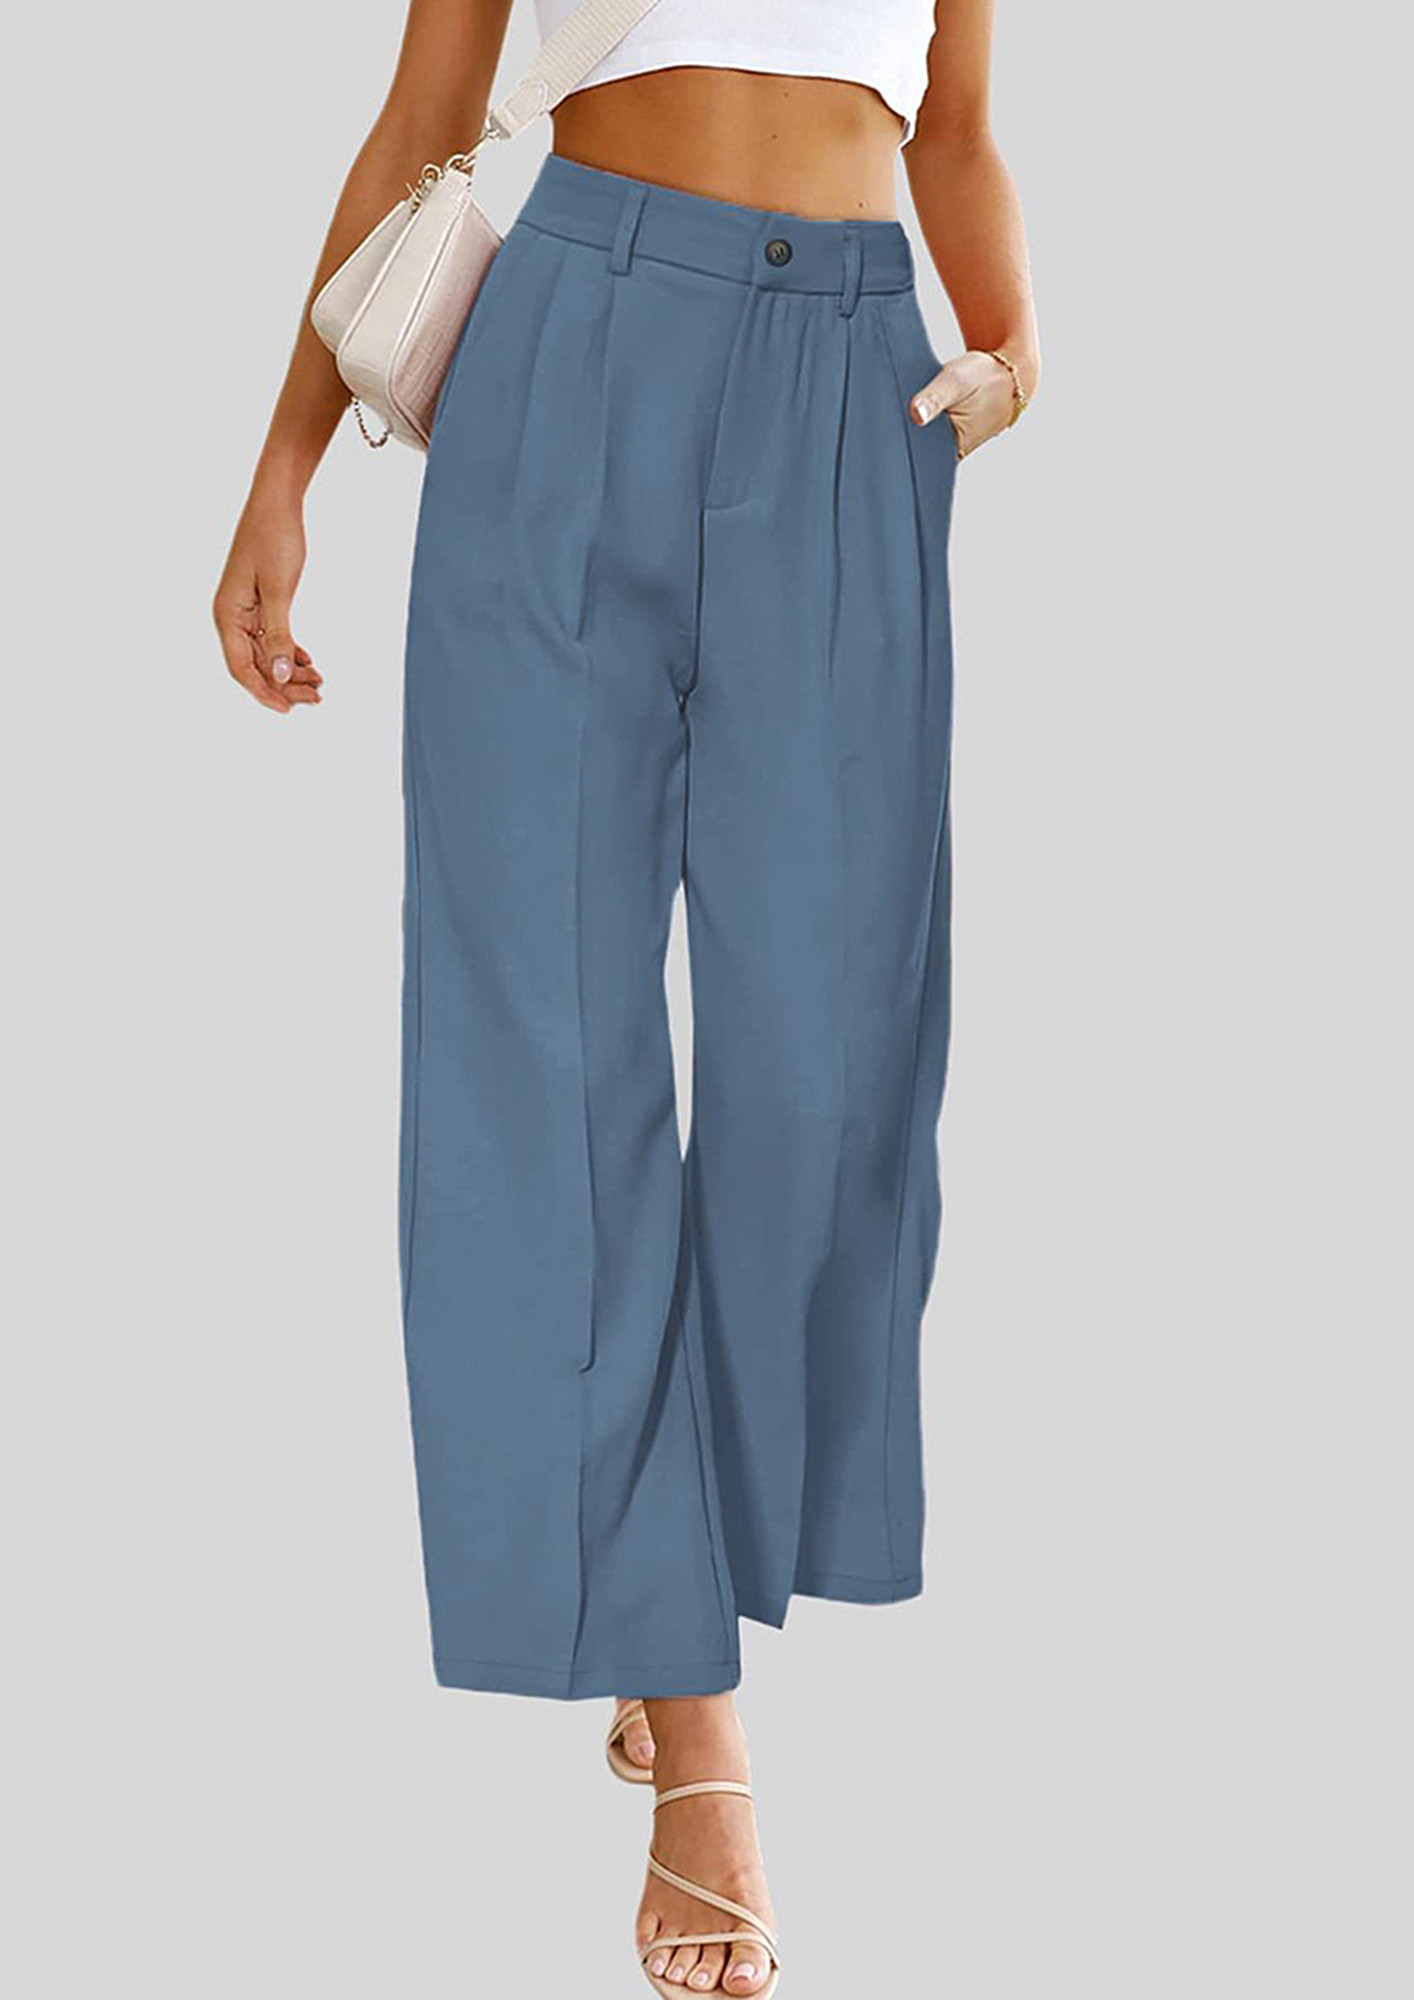 Loose Trousers - Buy Loose Trousers online in India